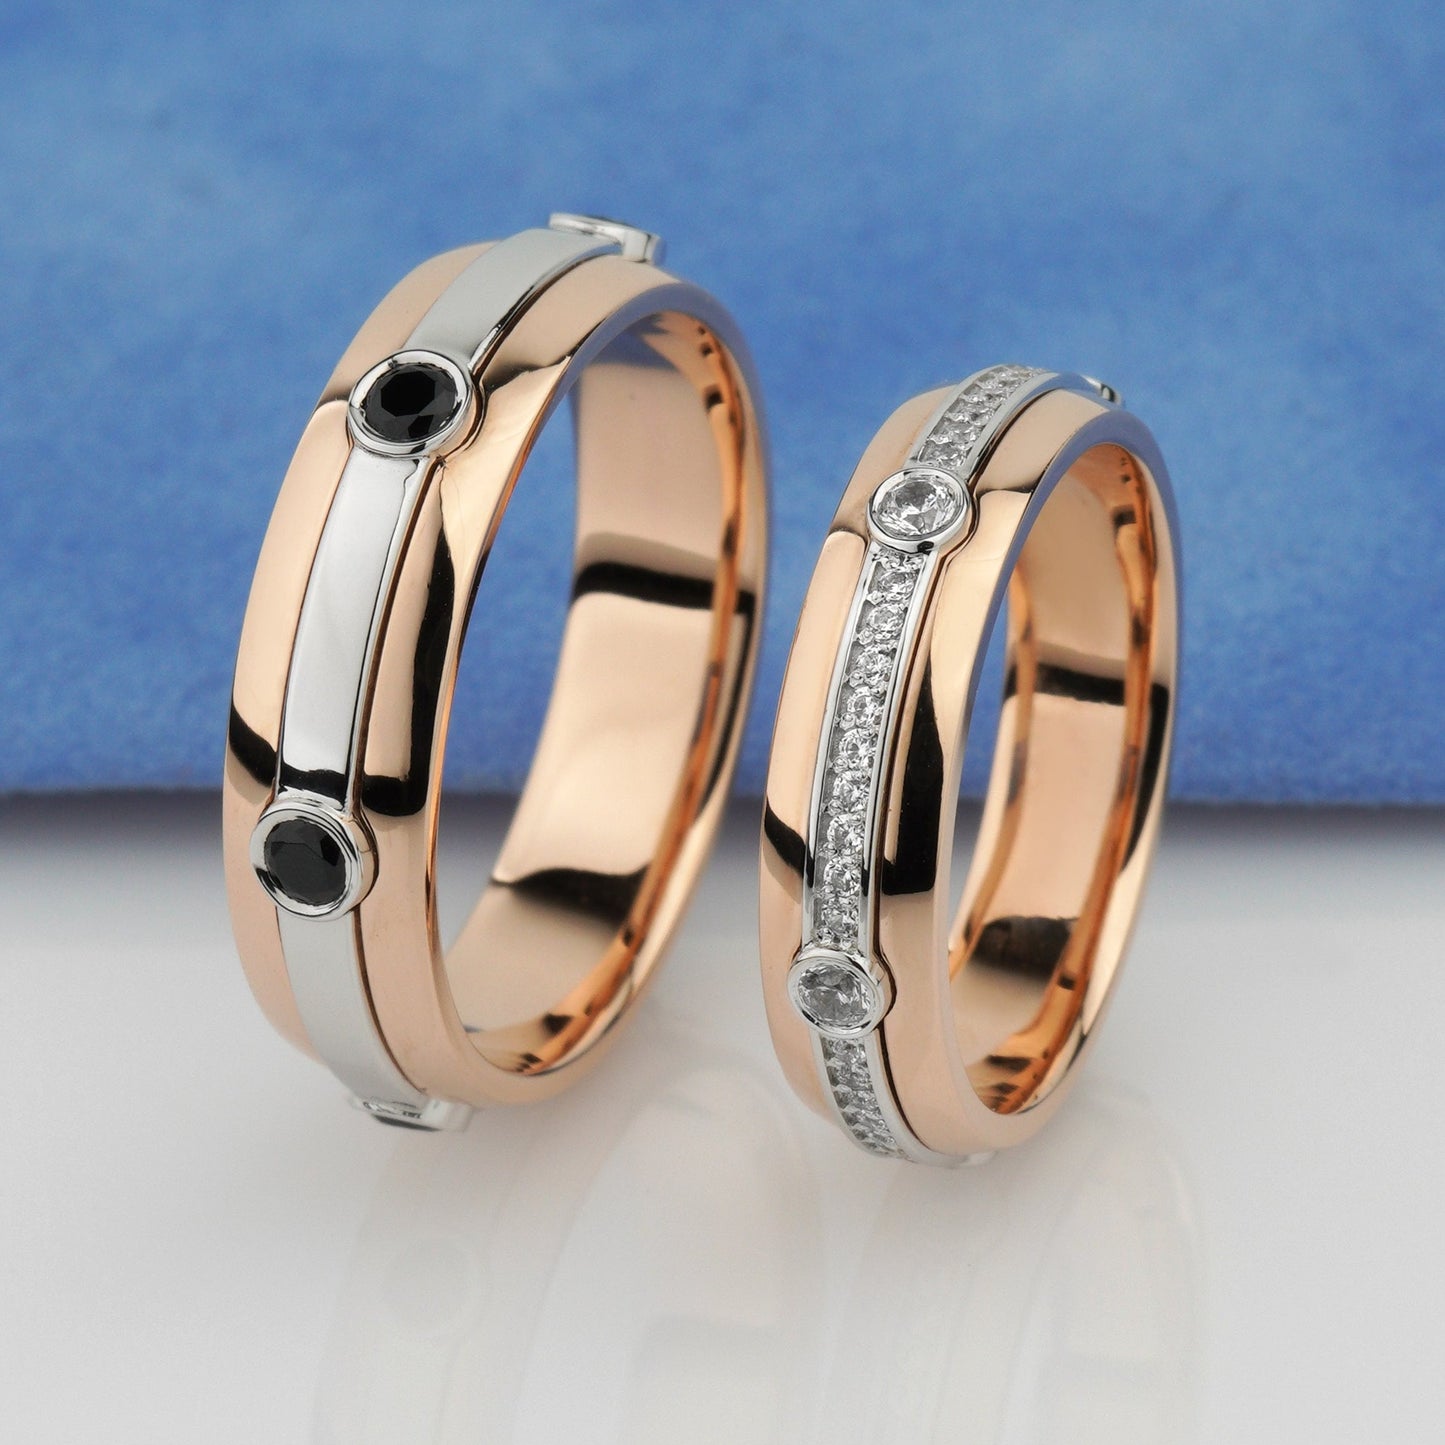 Two-tone matching wedding bands with black and white diamonds. Unique wedding bands set. His and hers wedding bands. Couple rings set. Matching wedding bands. Diamond gold rings. Diamond wedding bands 